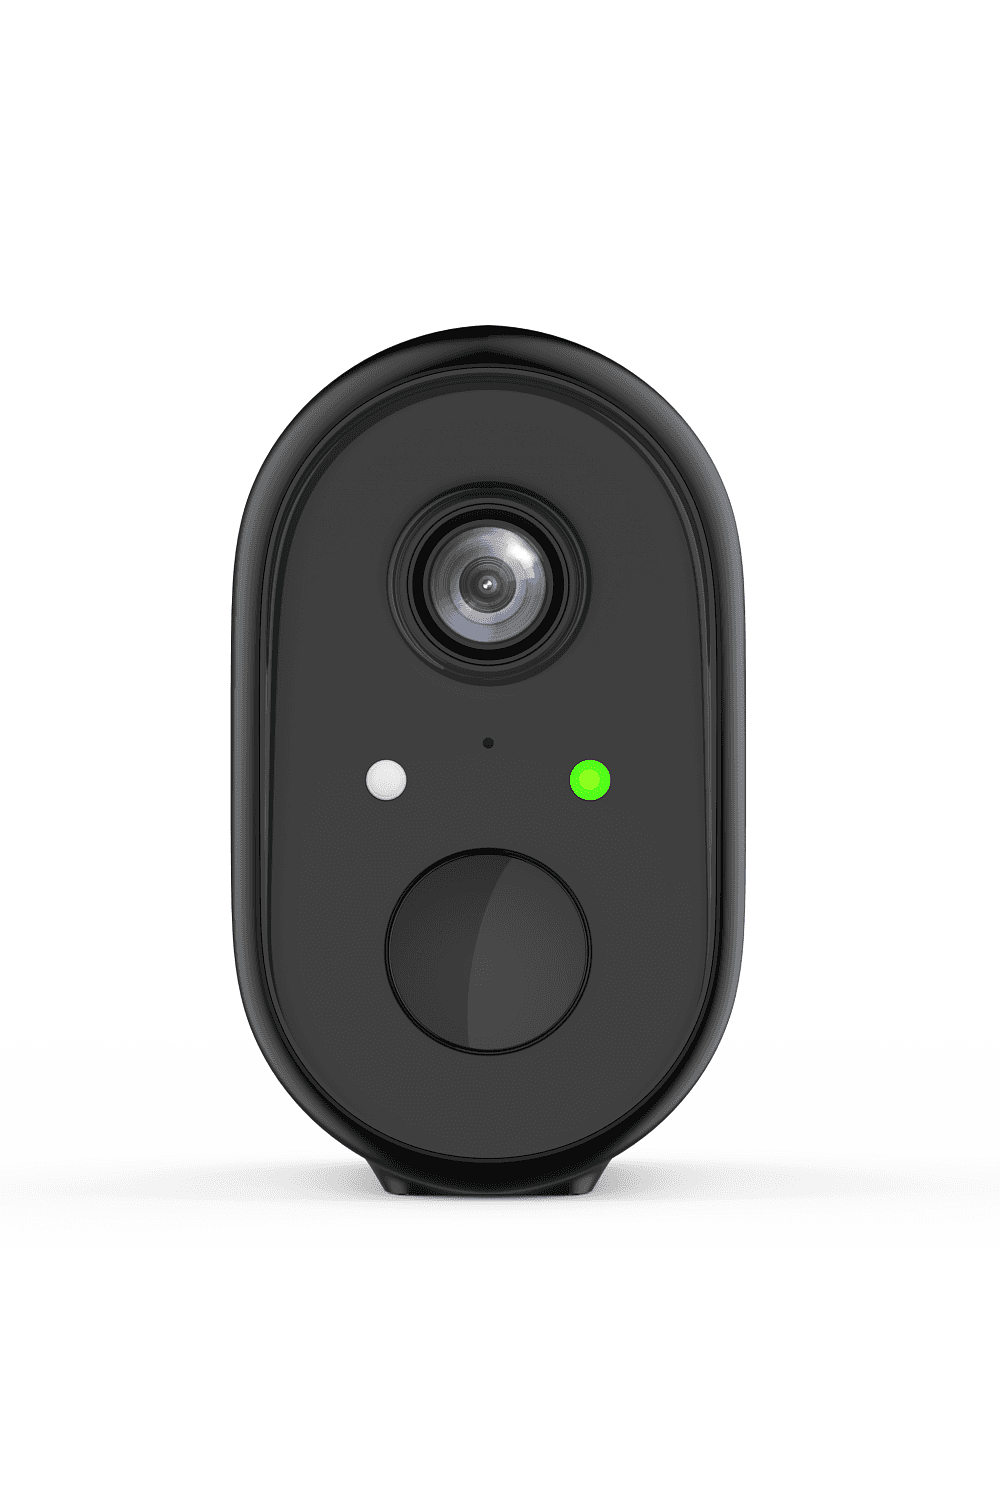 WOOX outdoor wireless security camera | R4260